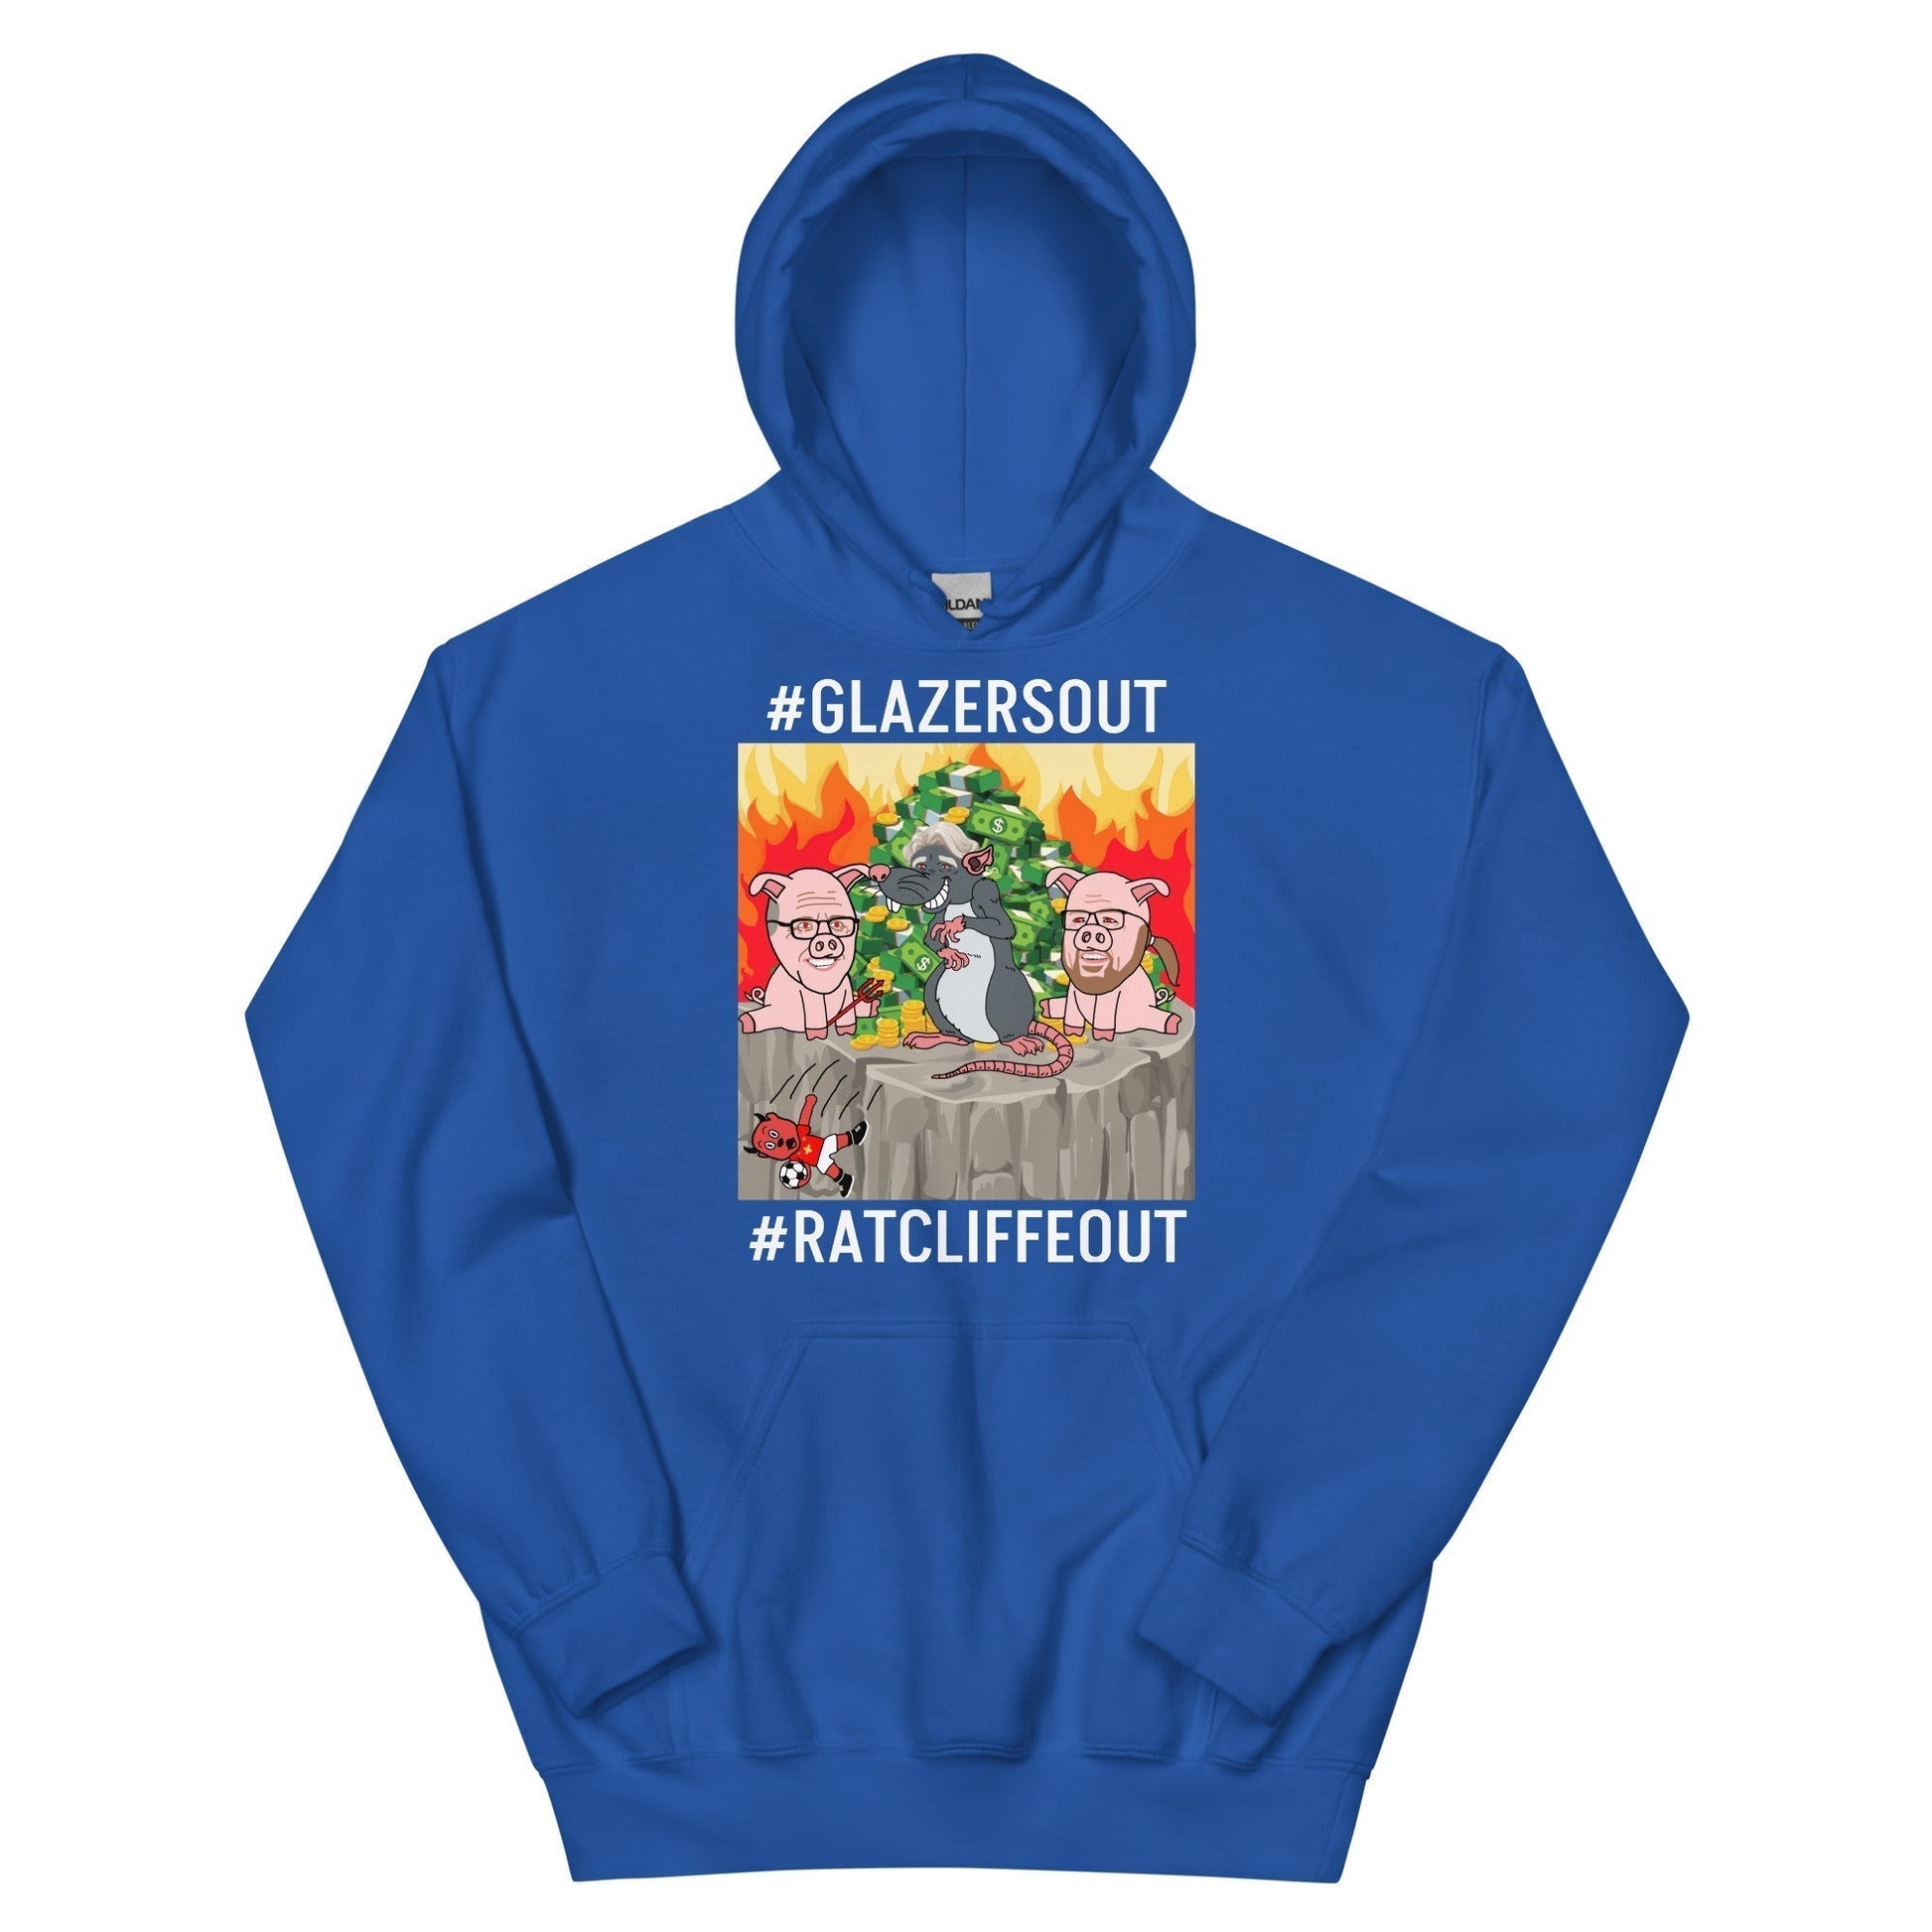 Manchester United Ratcliffe Out, Glazers Out Unisex Hoodie, White Letters, #GlazersOut #RatcliffeOut Next Cult Brand Football, GlazersOut, Manchester United, RatcliffeOut